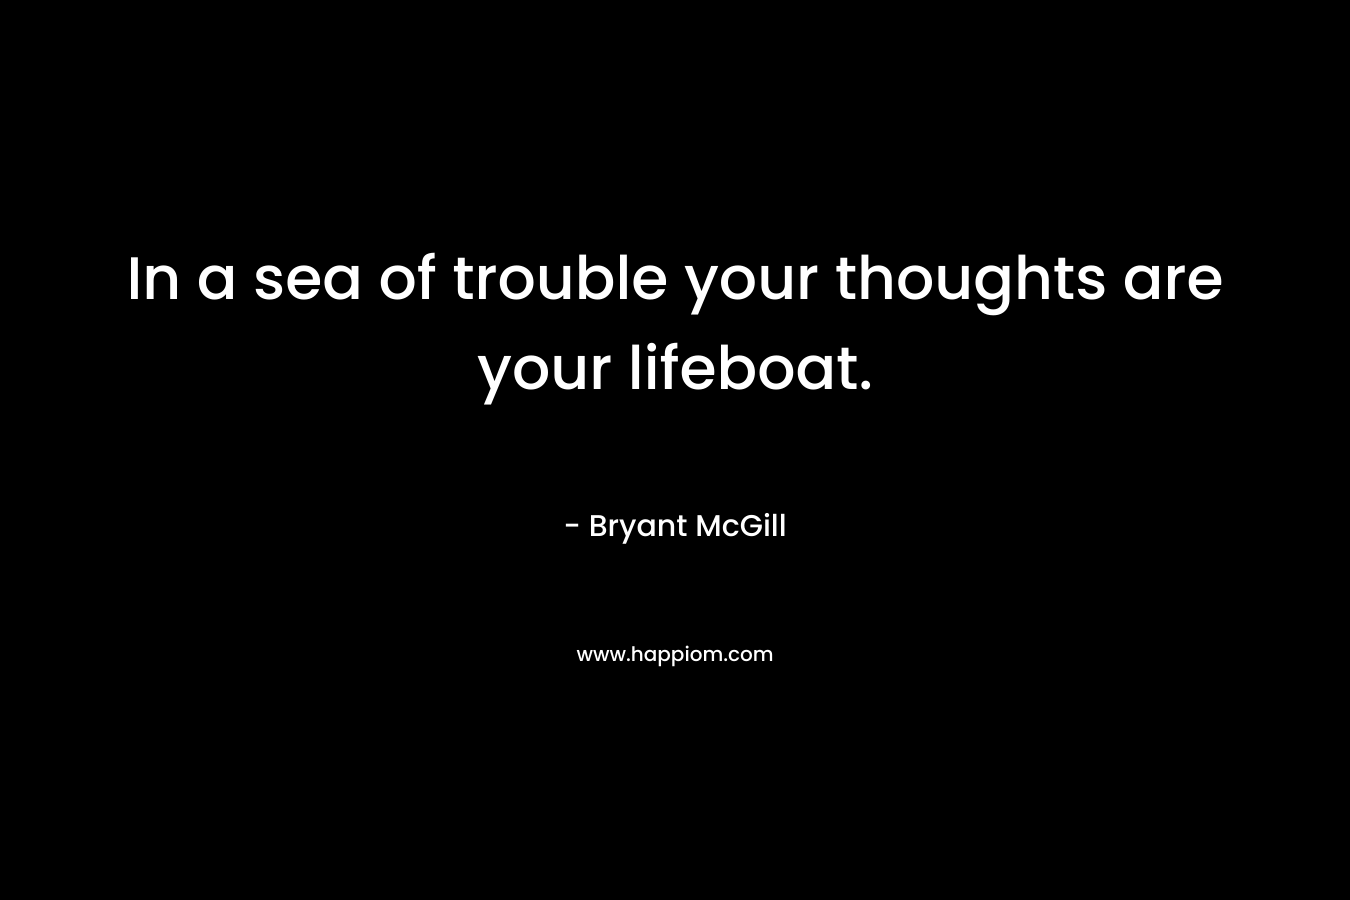 In a sea of trouble your thoughts are your lifeboat.